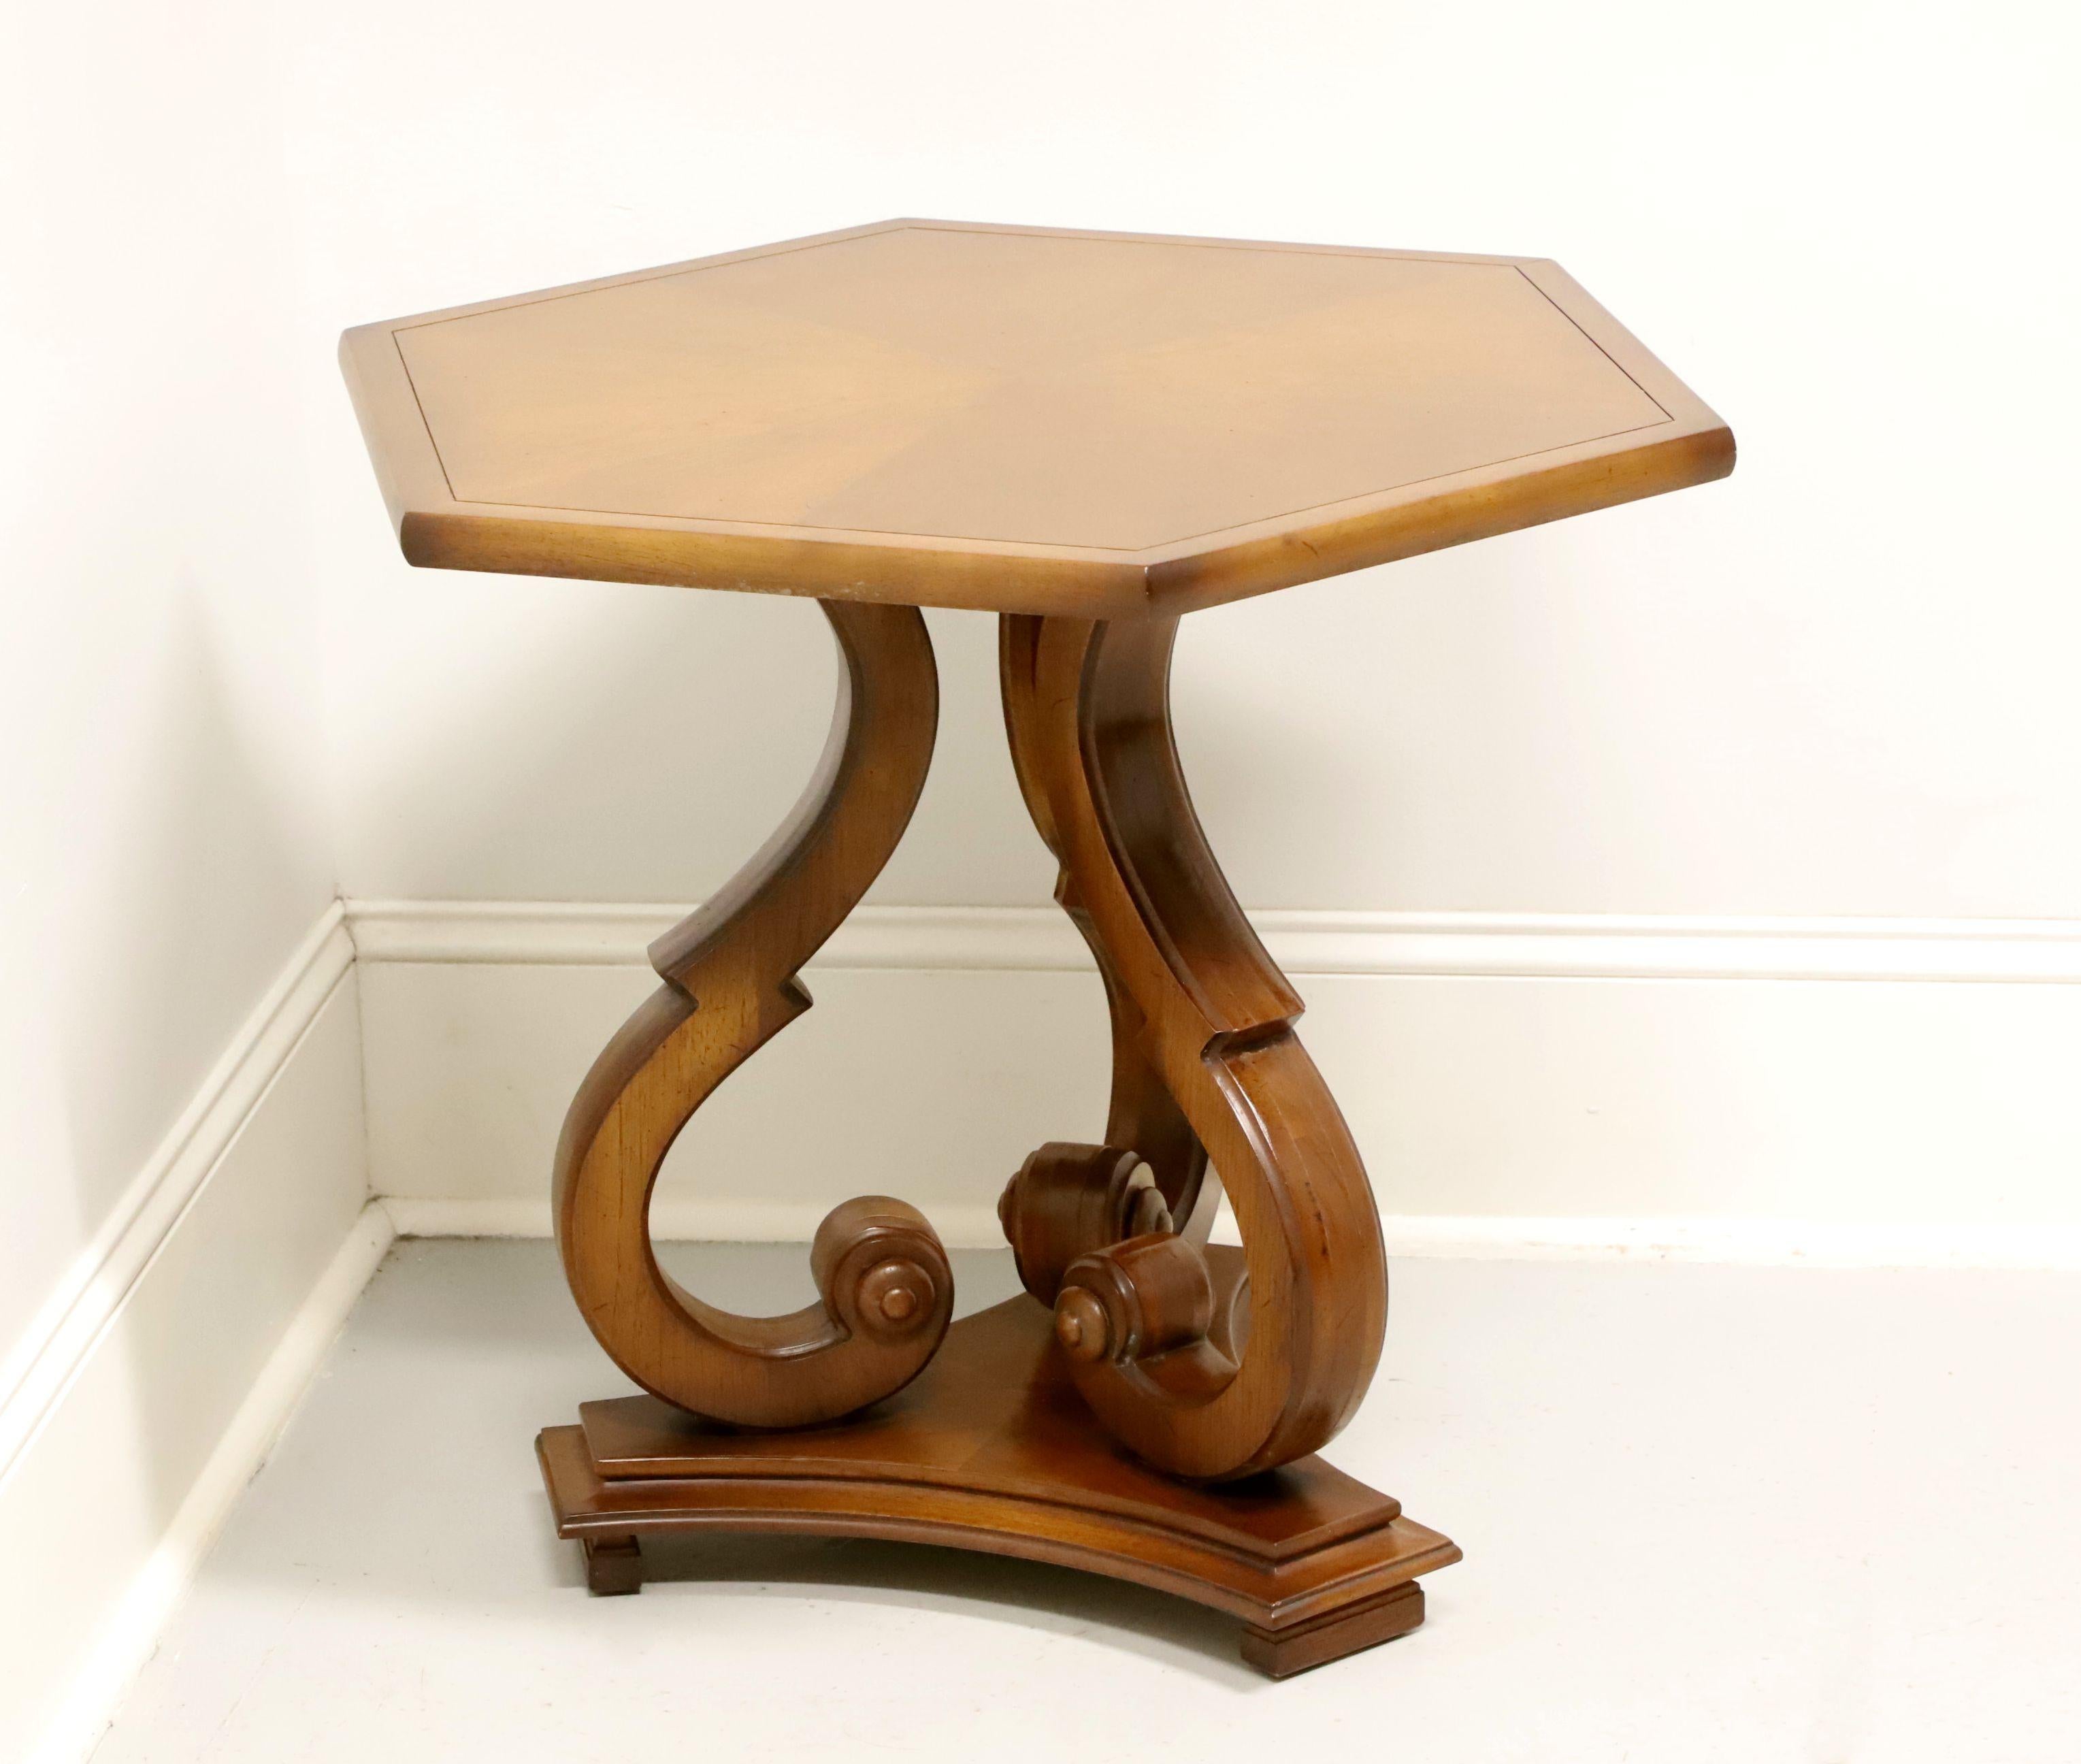 A Neoclassical style side table by Tomlinson Furniture. Walnut, or similar nutwood, with their Nutmeg finish, hexagon shaped banded & inlaid flame wood top, and three scroll like legs resting on a triangular shaped solid base forming a pedestal.